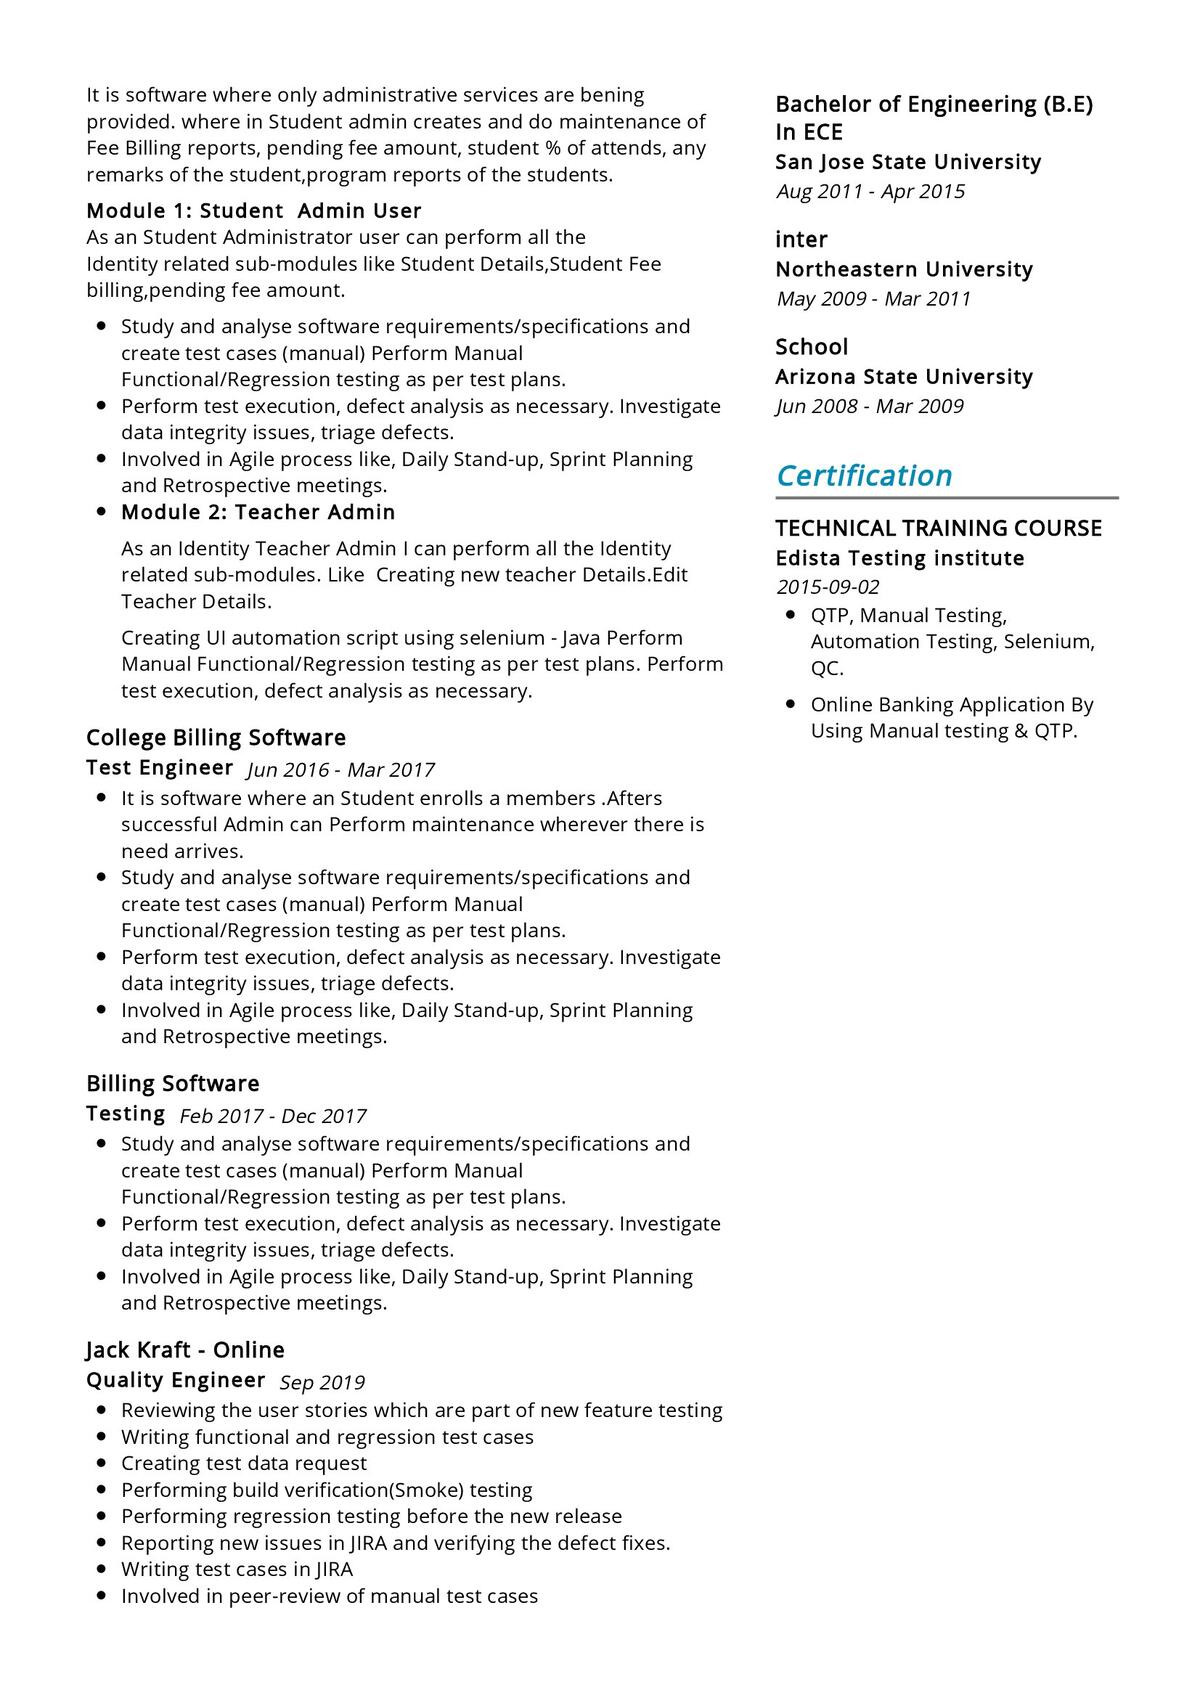 Sample Resume for Qtp Automation Testing for Freshers software Testing Resume Sample 2021 Writing Guide & Tips …